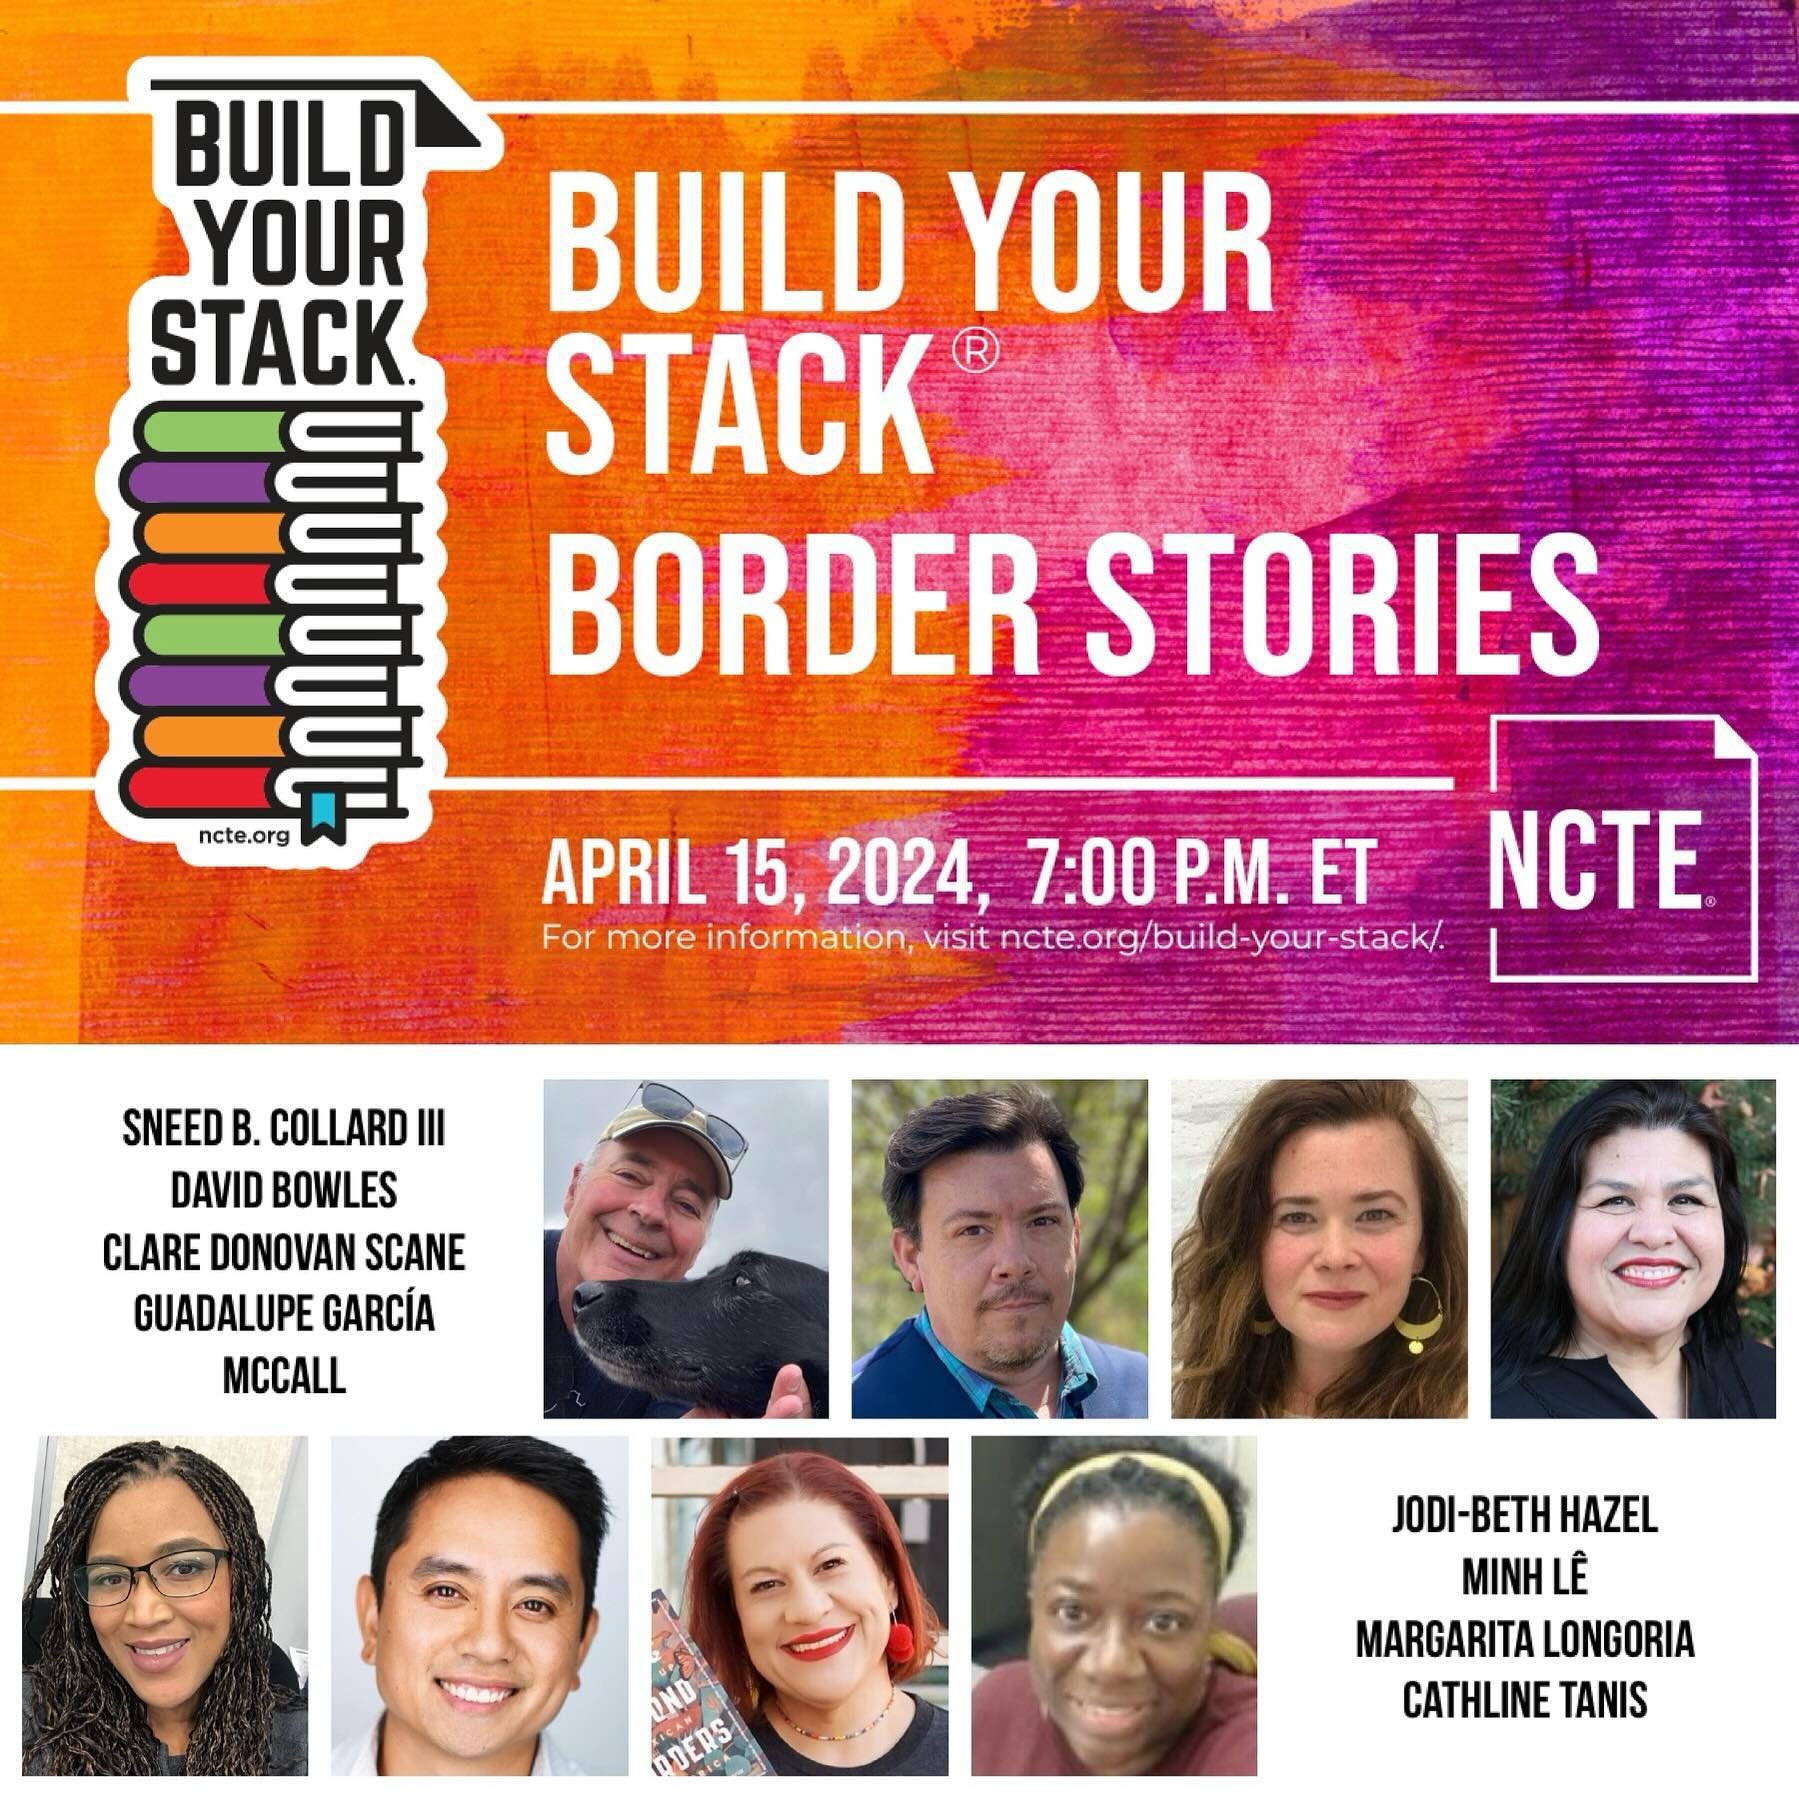 TODAY! Join us for an NCTE Build Your Stack conversation about Border Stories ❤️ #buildyourstack 

Registration is open to the public, RSVP here: https://ncte.org/build-your-stack/

@nctegram @sneedcollard @davidobowles @cdsliteracies @guadalupemccal